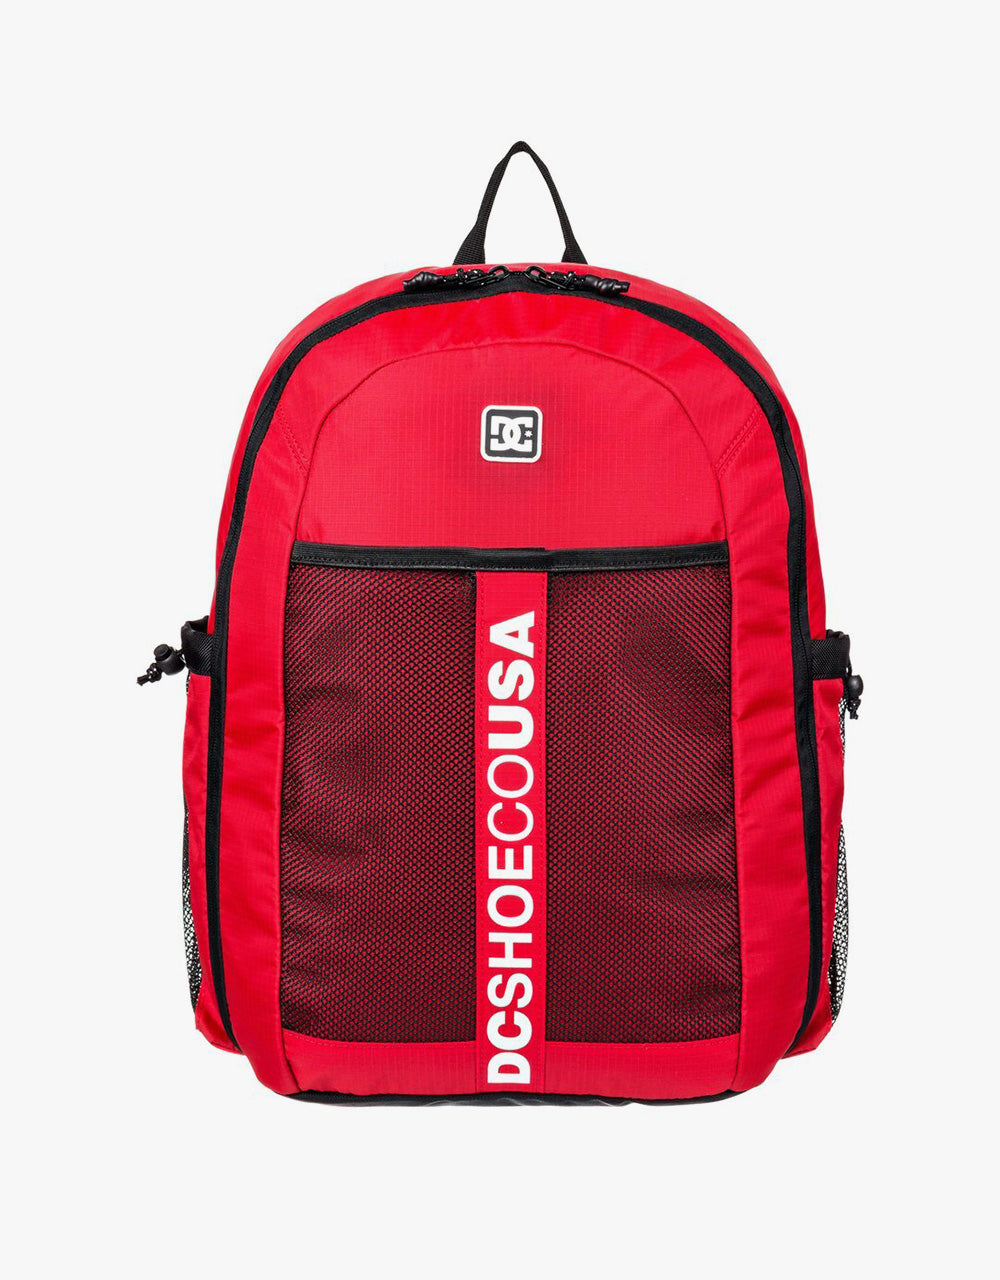 DC Bumper Backpack - Racing Red